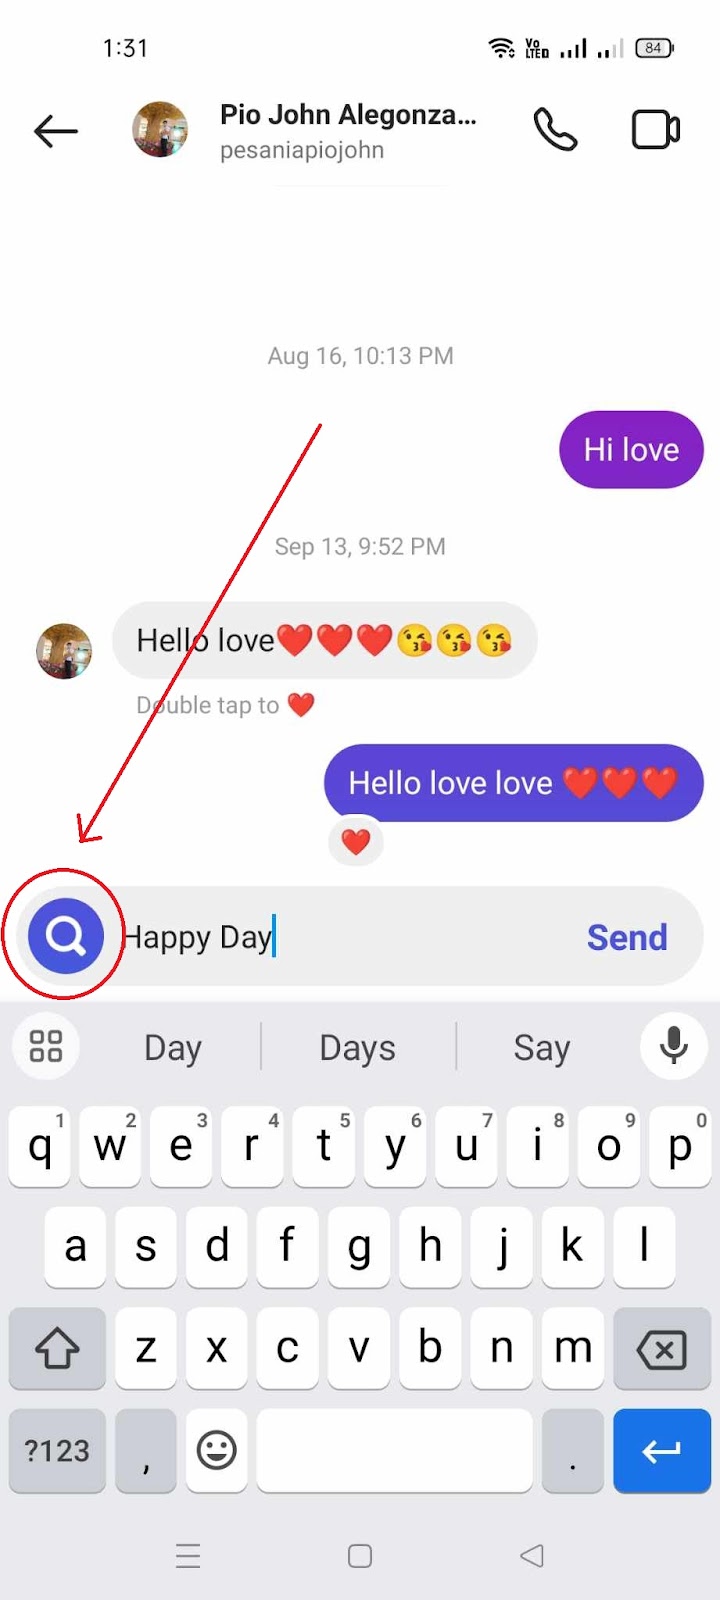 How to Send GIft Messages on Instagram - Click Blue Icon